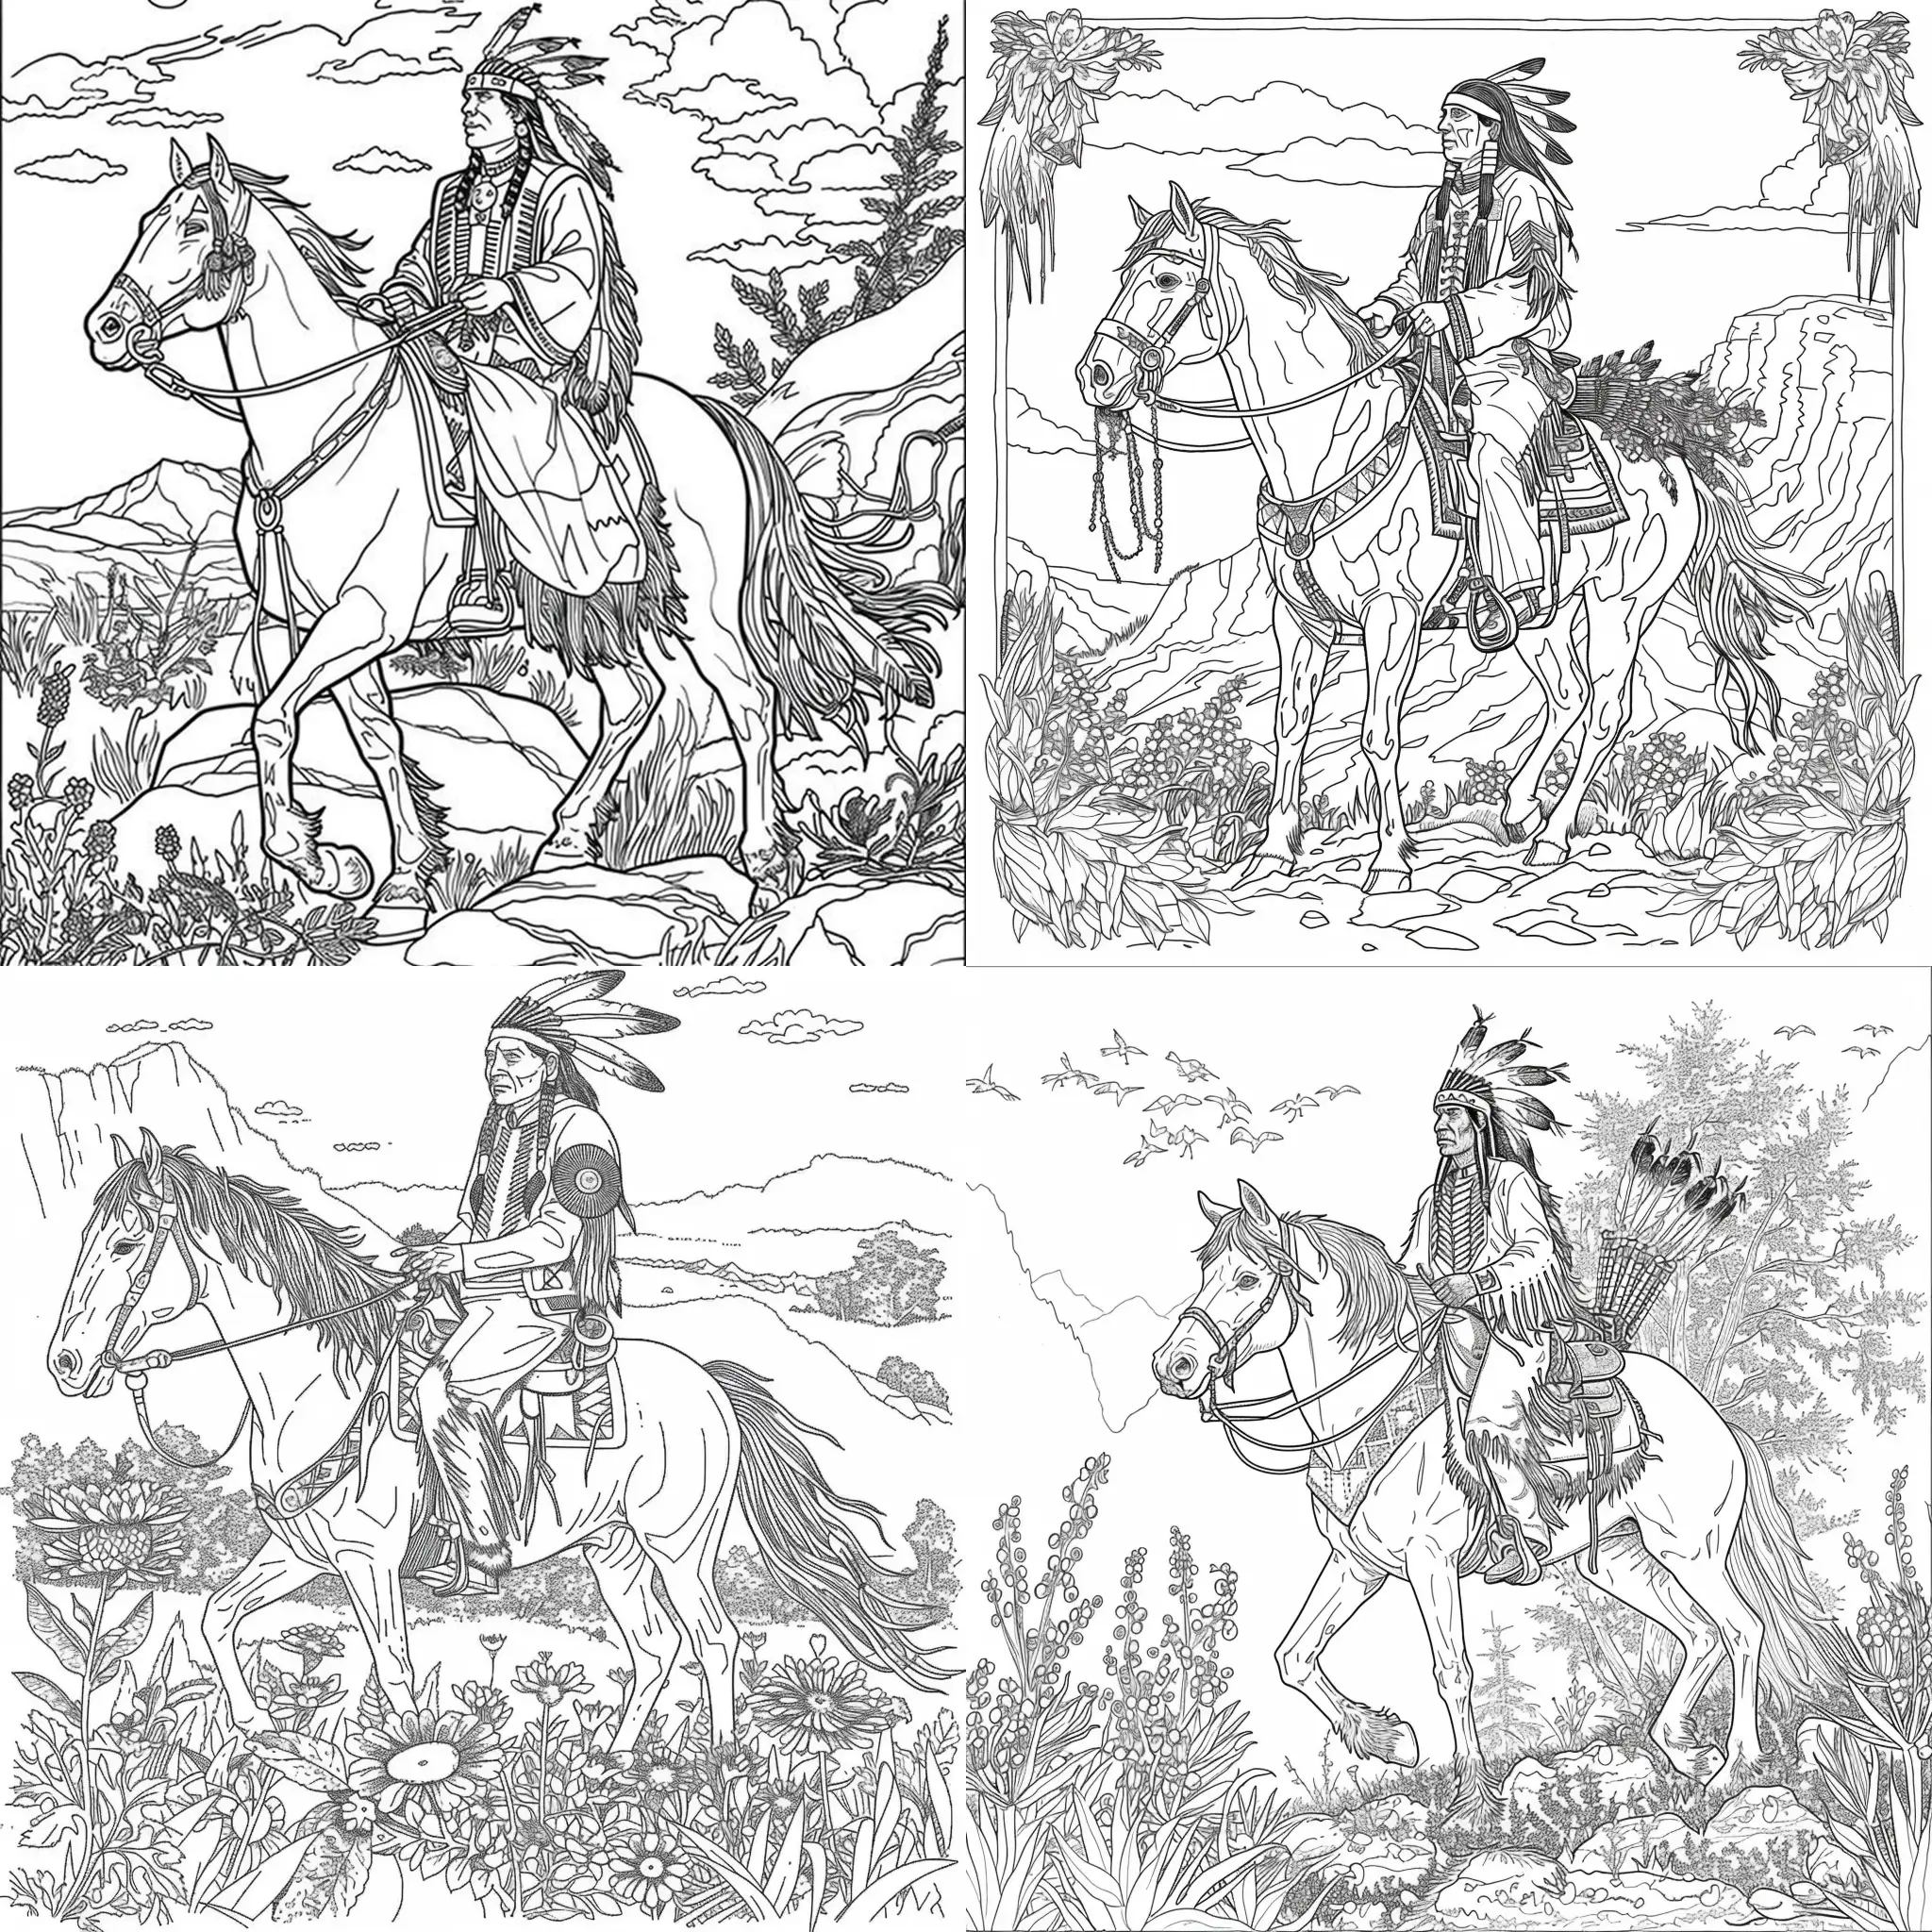 Imagine a Native American coloring book page with no backgroud and a Native American medicine man riding his horse and carrying herbs for a 8.5 x 11 page